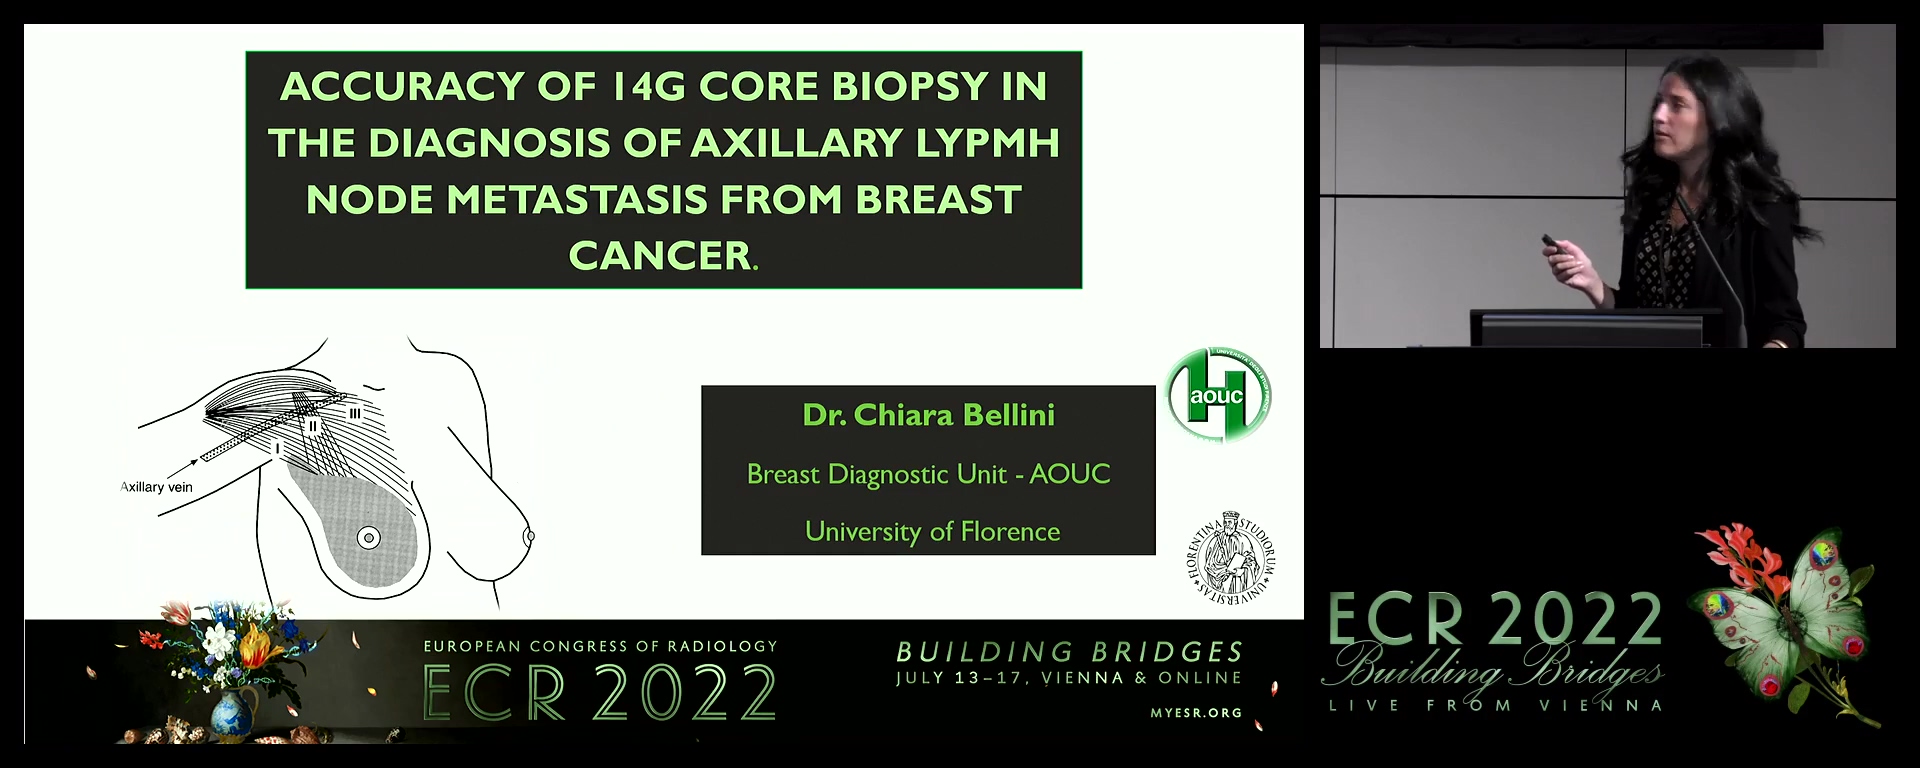 Accuracy of 14G core biopsy in the diagnosis of axillary lymph node metastasis from breast cancer